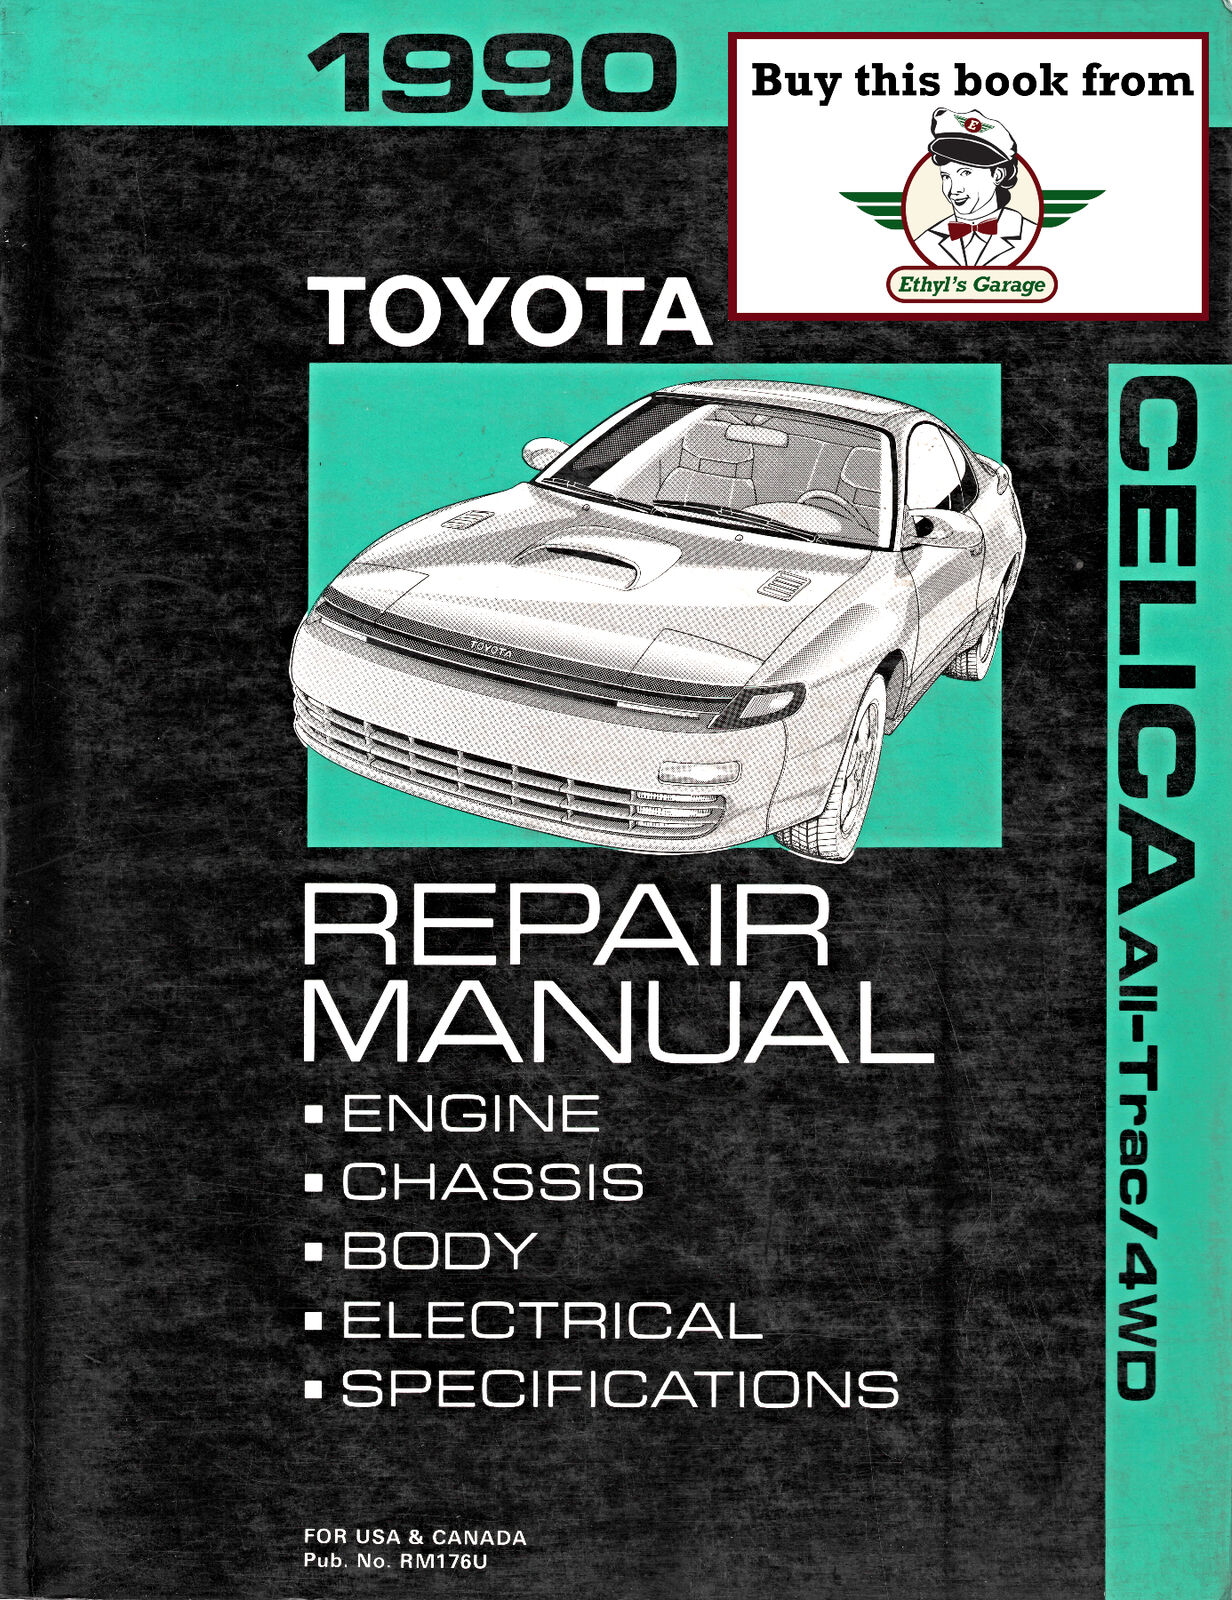 1990 Toyota Celica All-Trac/4WD Factory Shop Service Repair Maintenance Manual